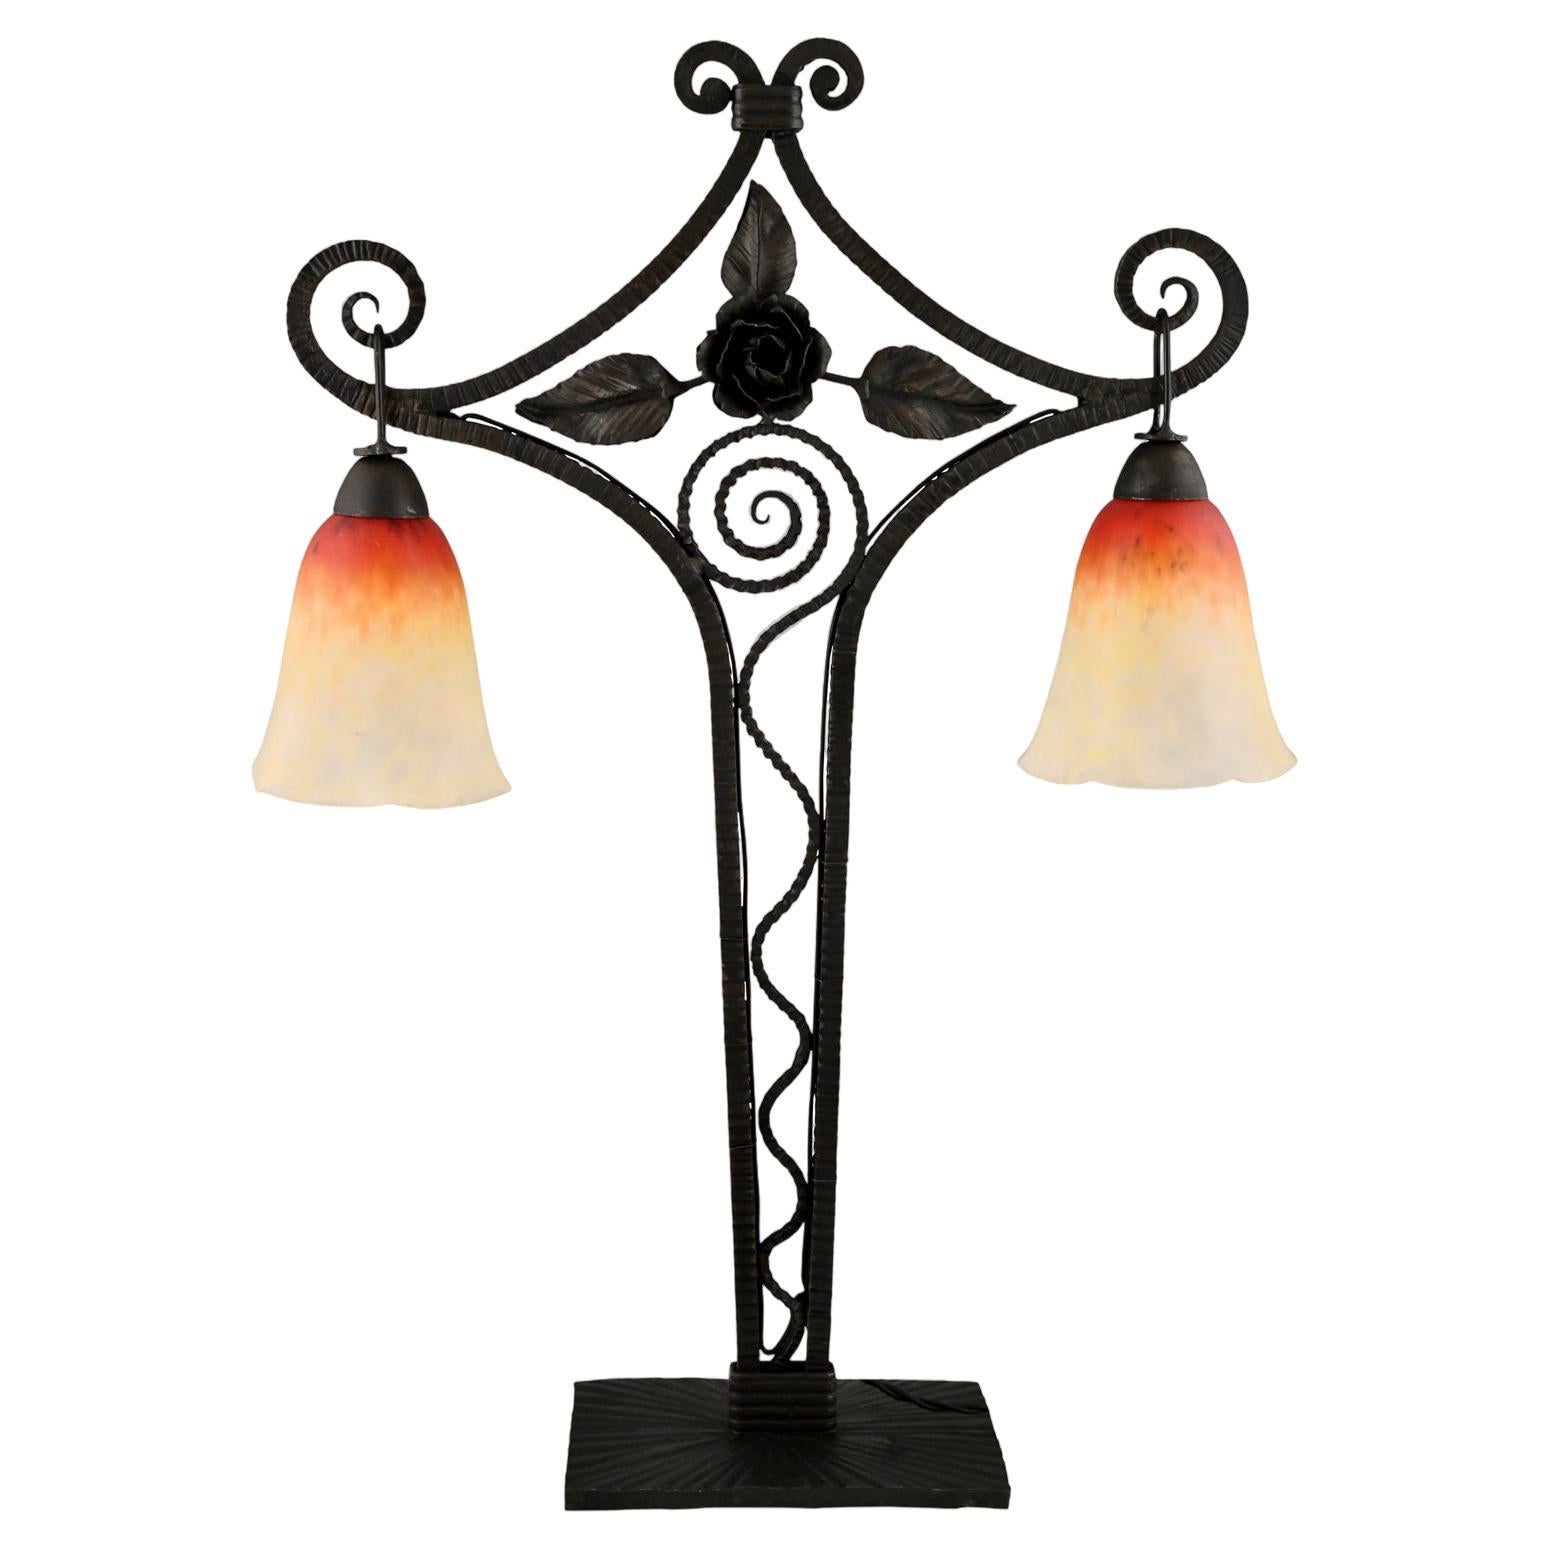 SchneiderArt Deco double light table lamp on wrought iron base with rose 1925